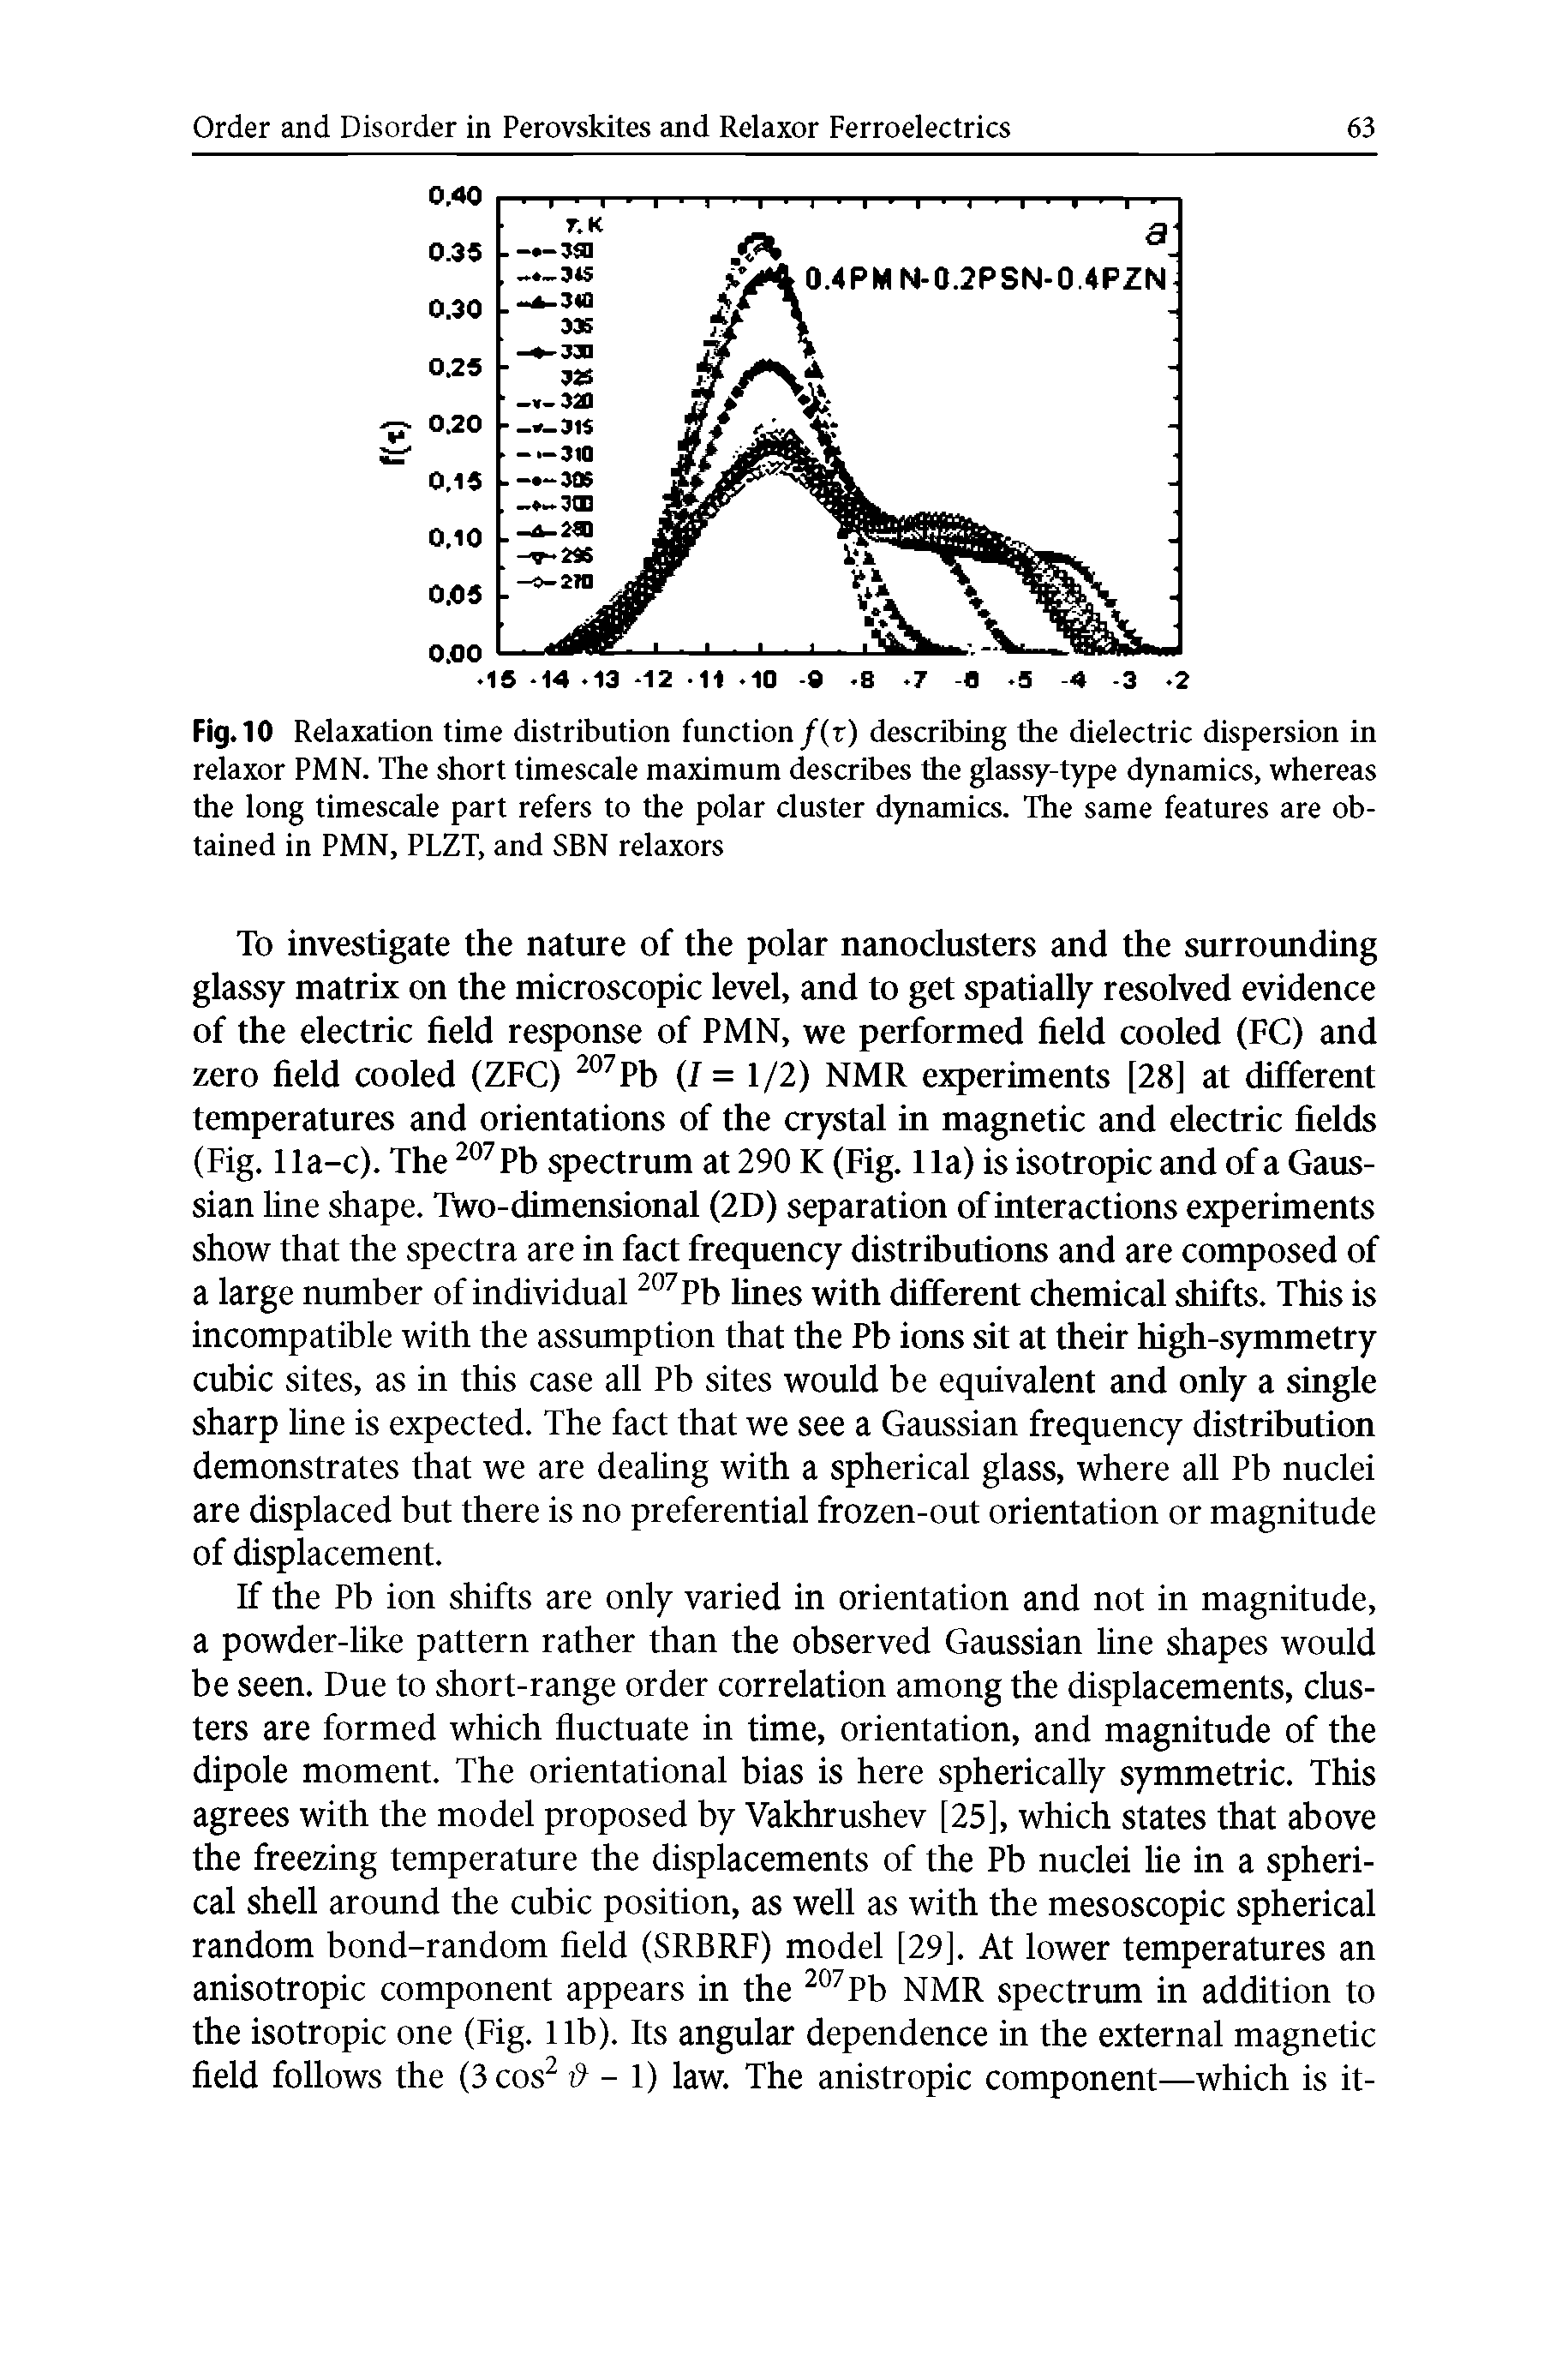 Fig. 10 Relaxation time distribution function/(r) describing the dielectric dispersion in relaxor PMN. The short timescale maximnm describes the glassy-type dynamics, whereas the long timescale part refers to the polar clnster dynamics. The same featnres are obtained in PMN, PLZT, and SEN relaxors...